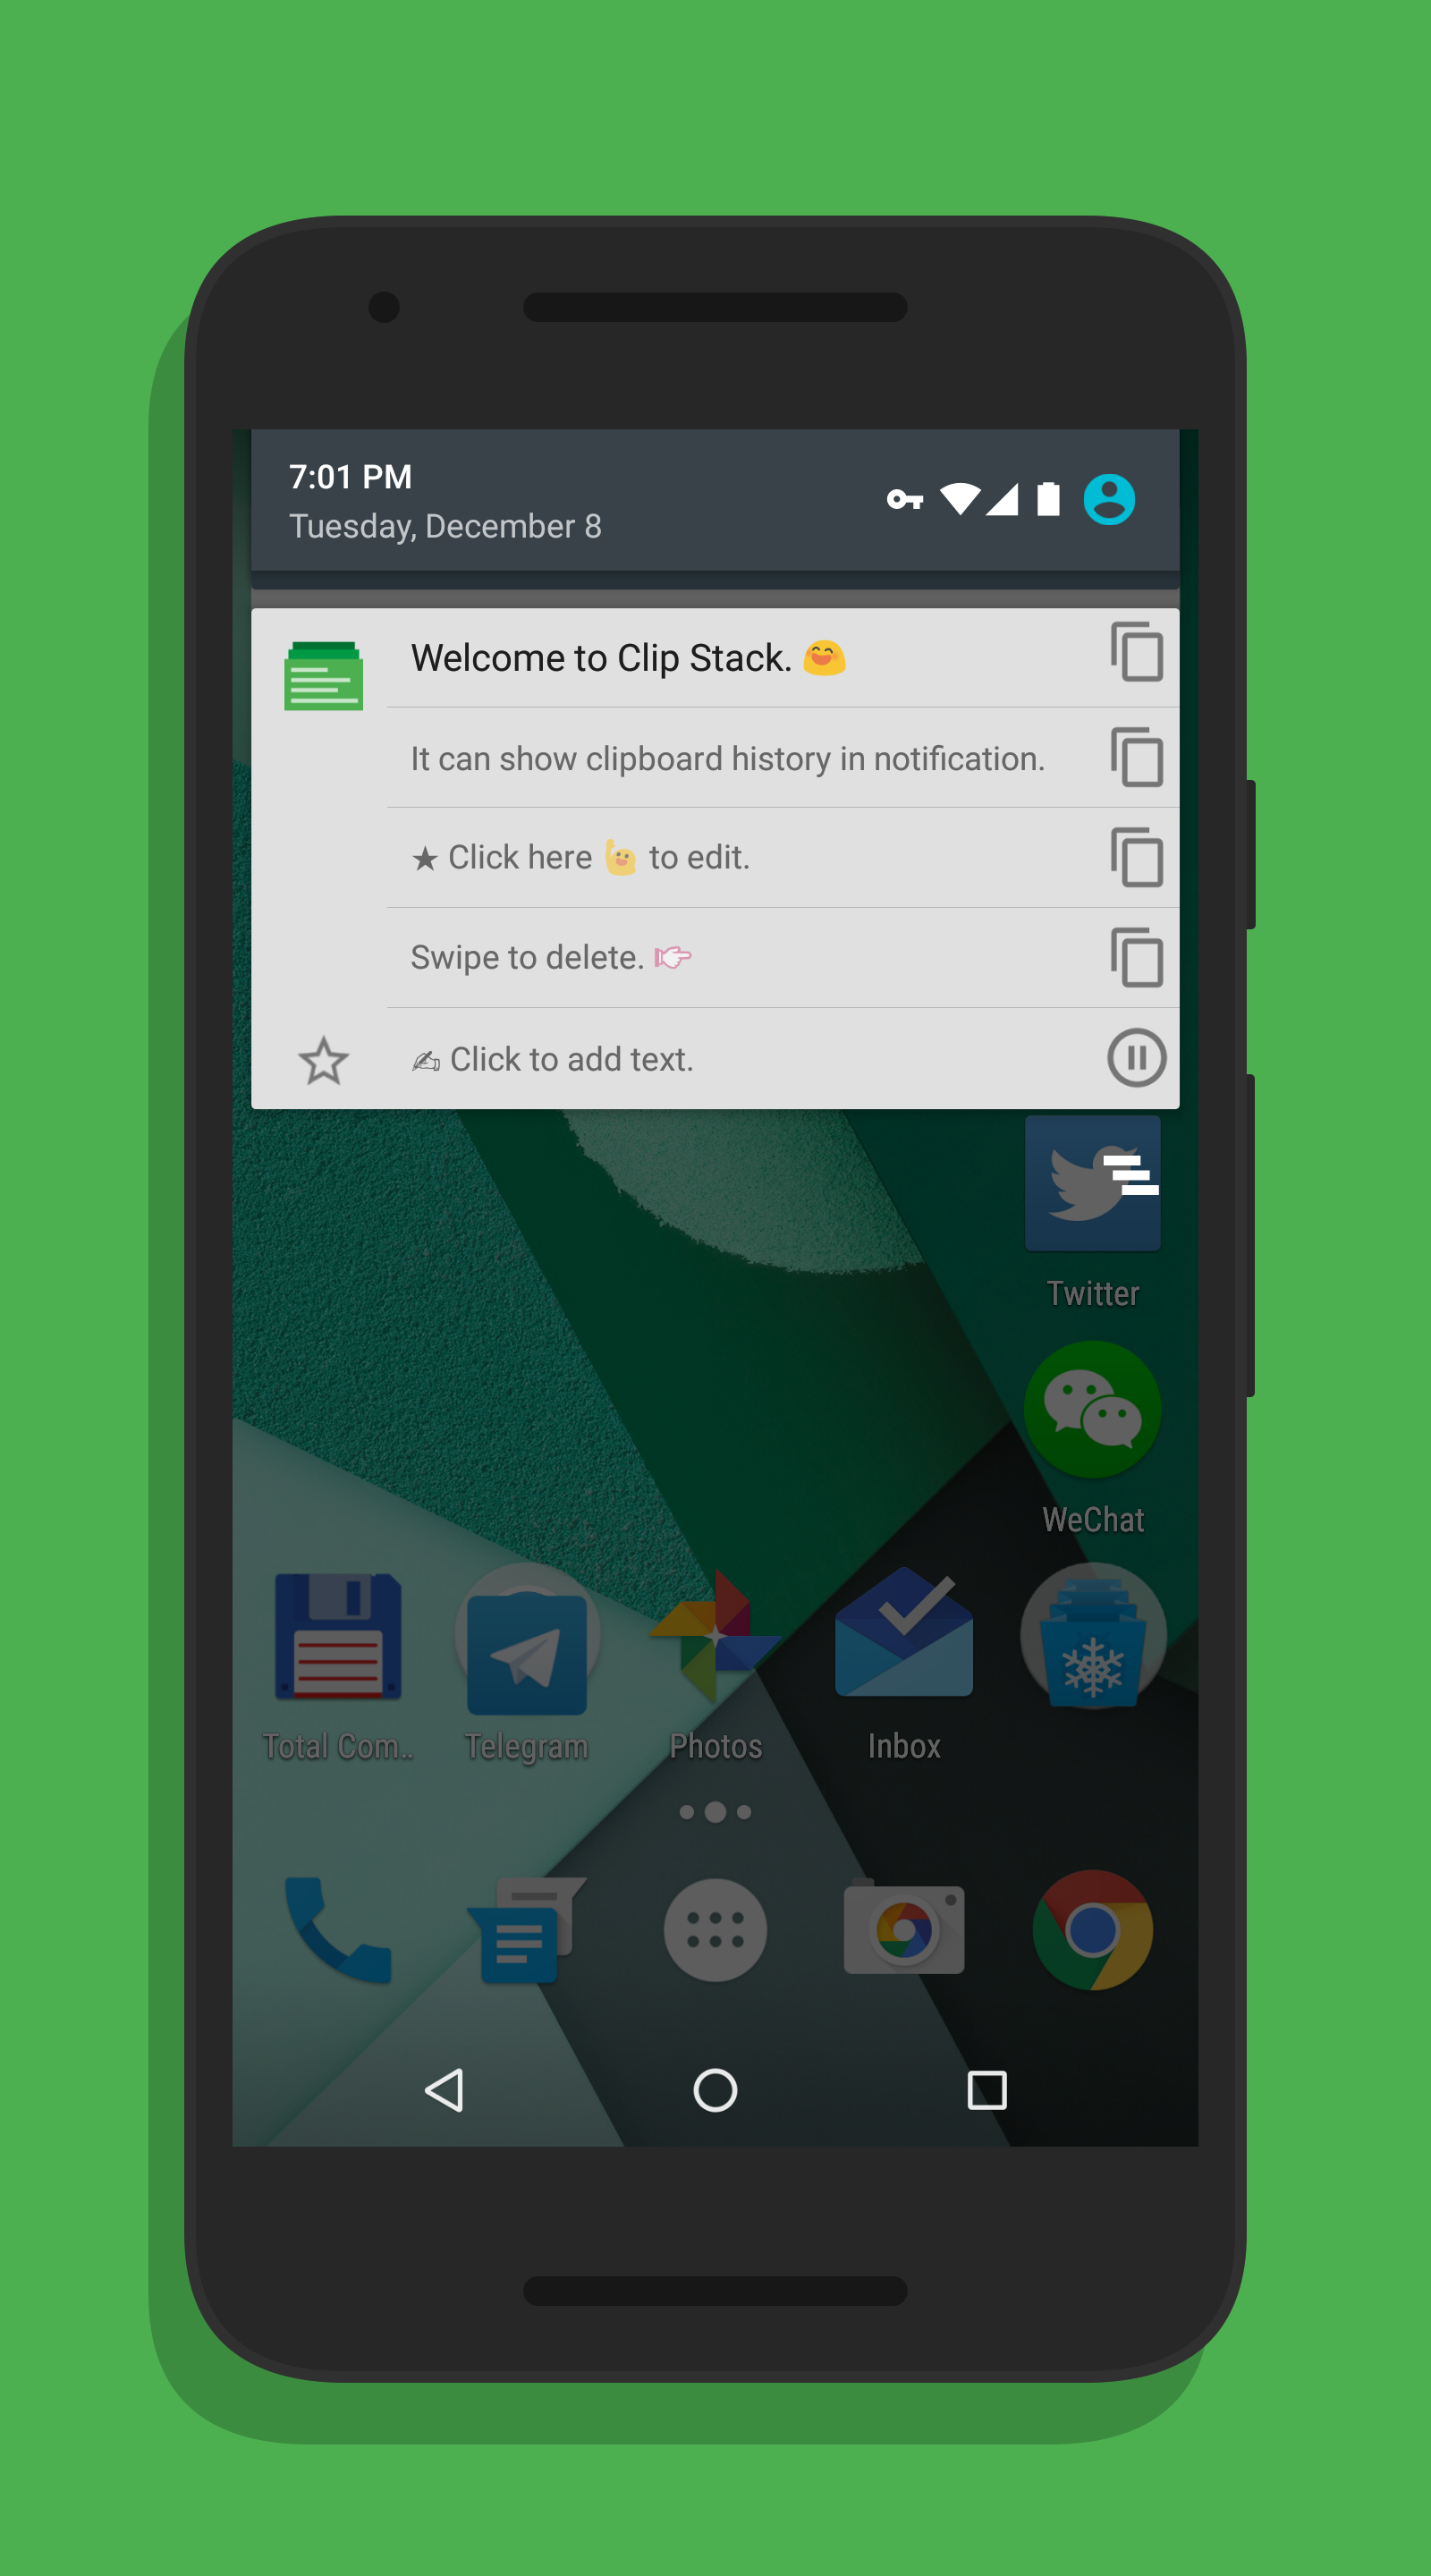 Android application Clip Stack - Clipboard Manager (Free, No-Ads) screenshort